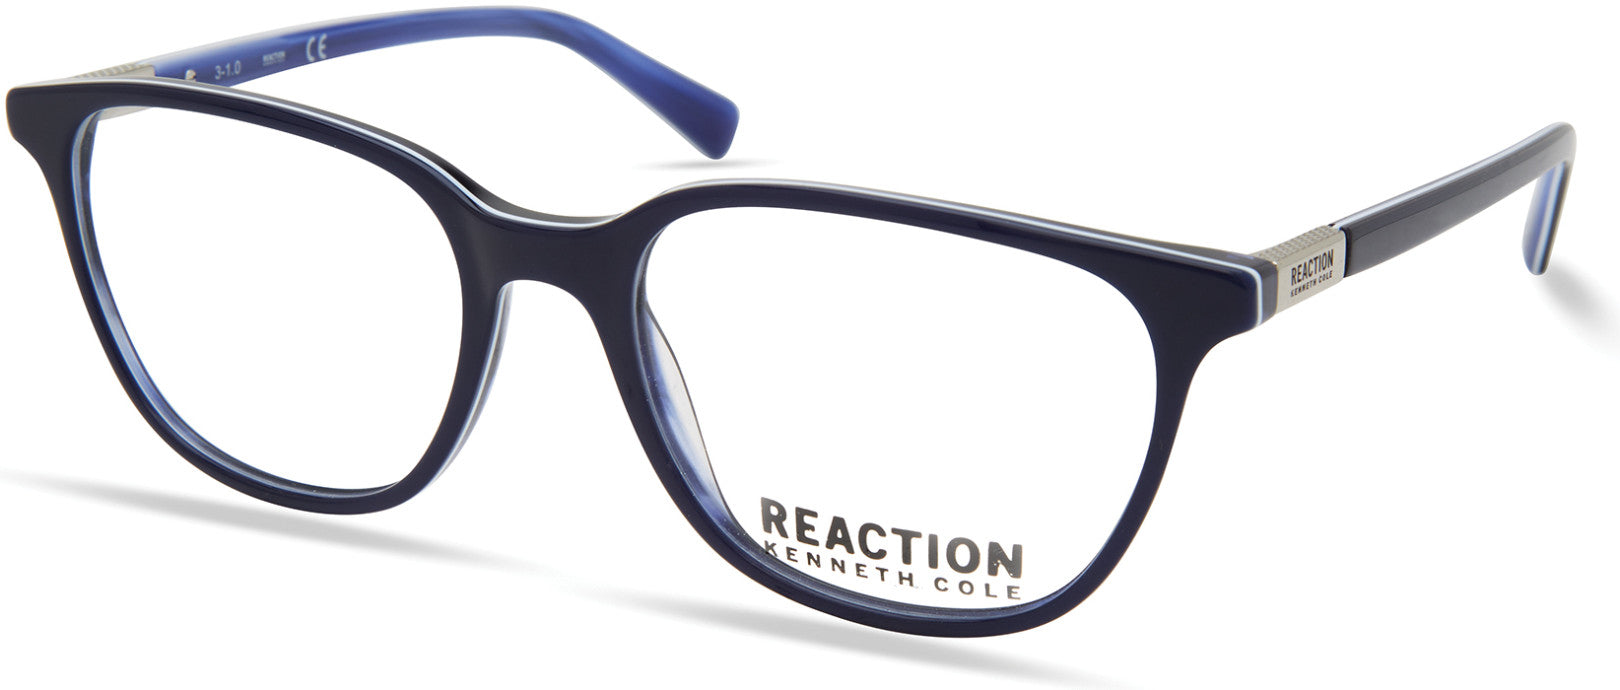 Kenneth Cole New York,Kenneth Cole Reaction KC0876 Square Eyeglasses 092-092 - Blue